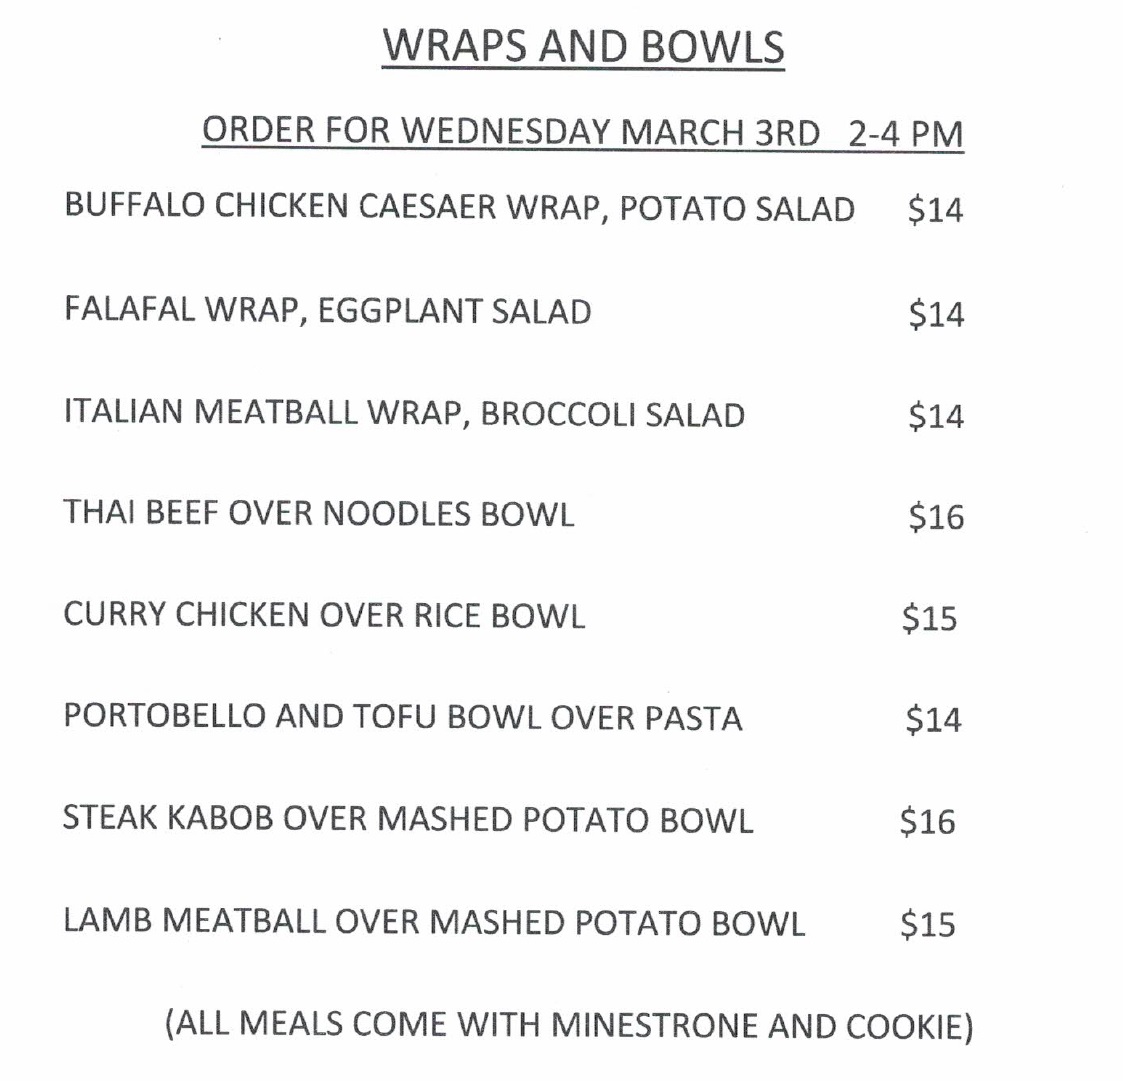 Wraps and Bowls Takeout